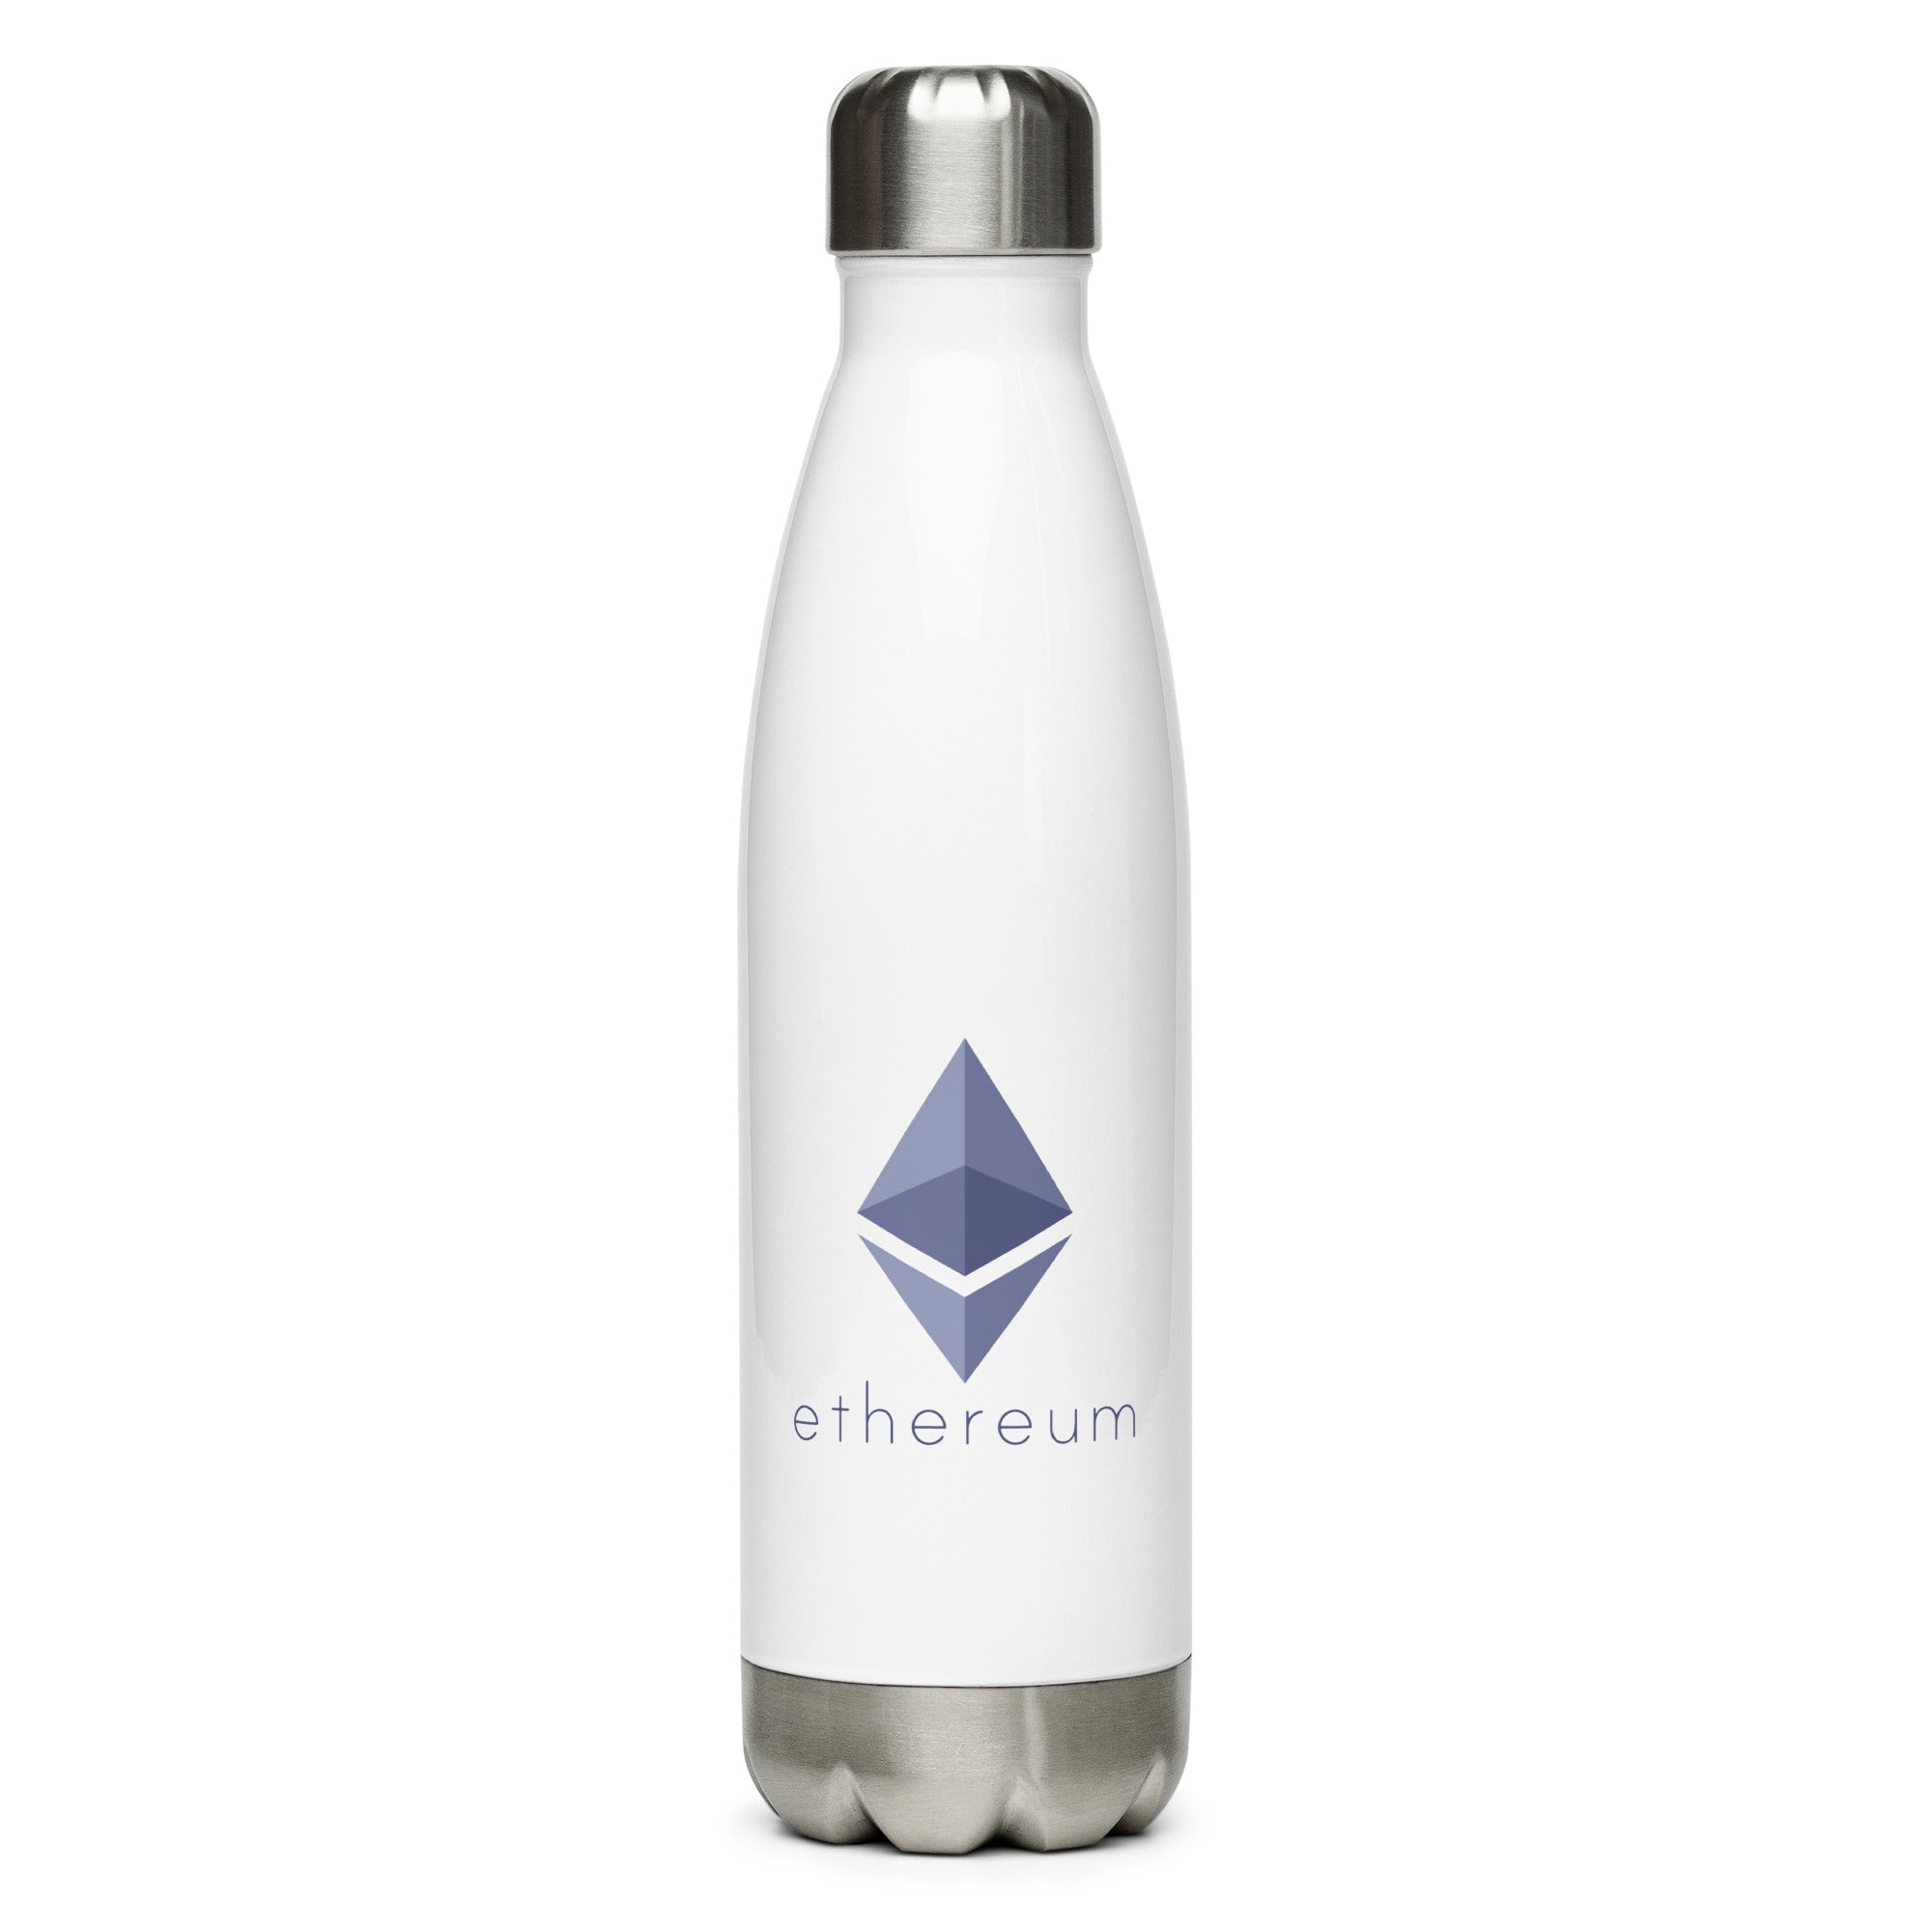 Ethereum Stainless steel water bottle